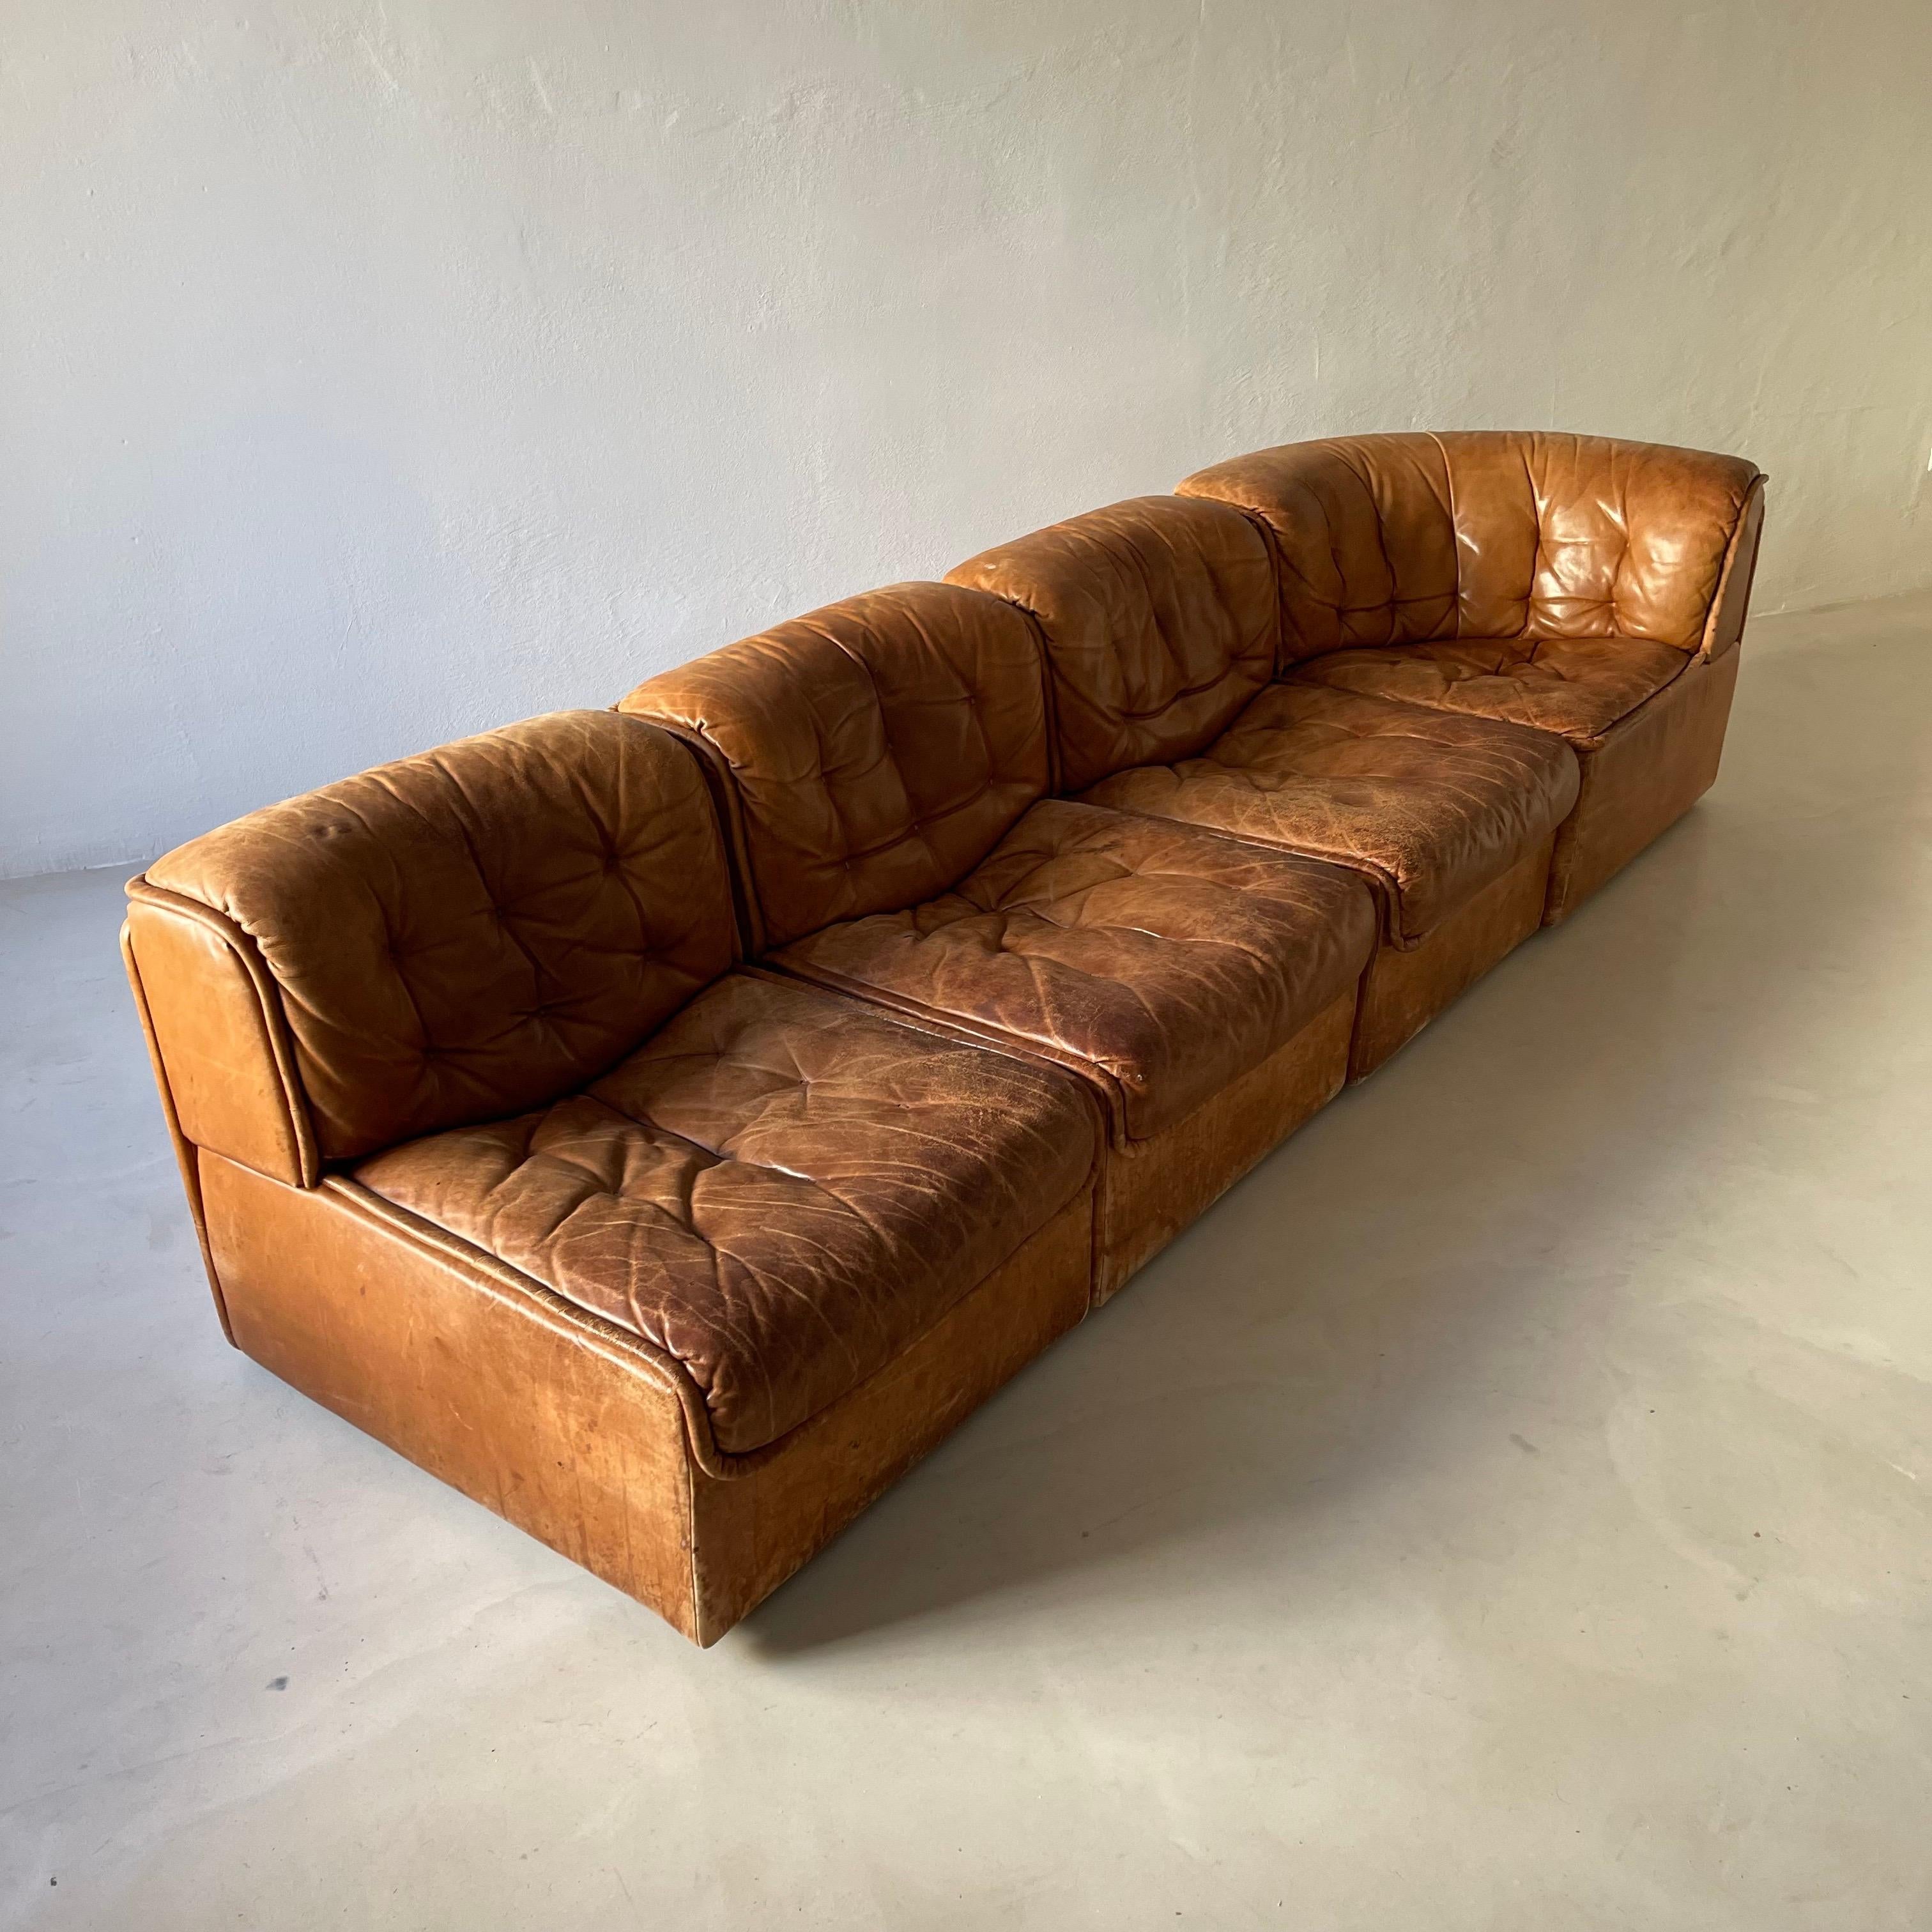 De Sede, 'DS-22' sectional sofa, leather, Switzerland, 1970s.

This beautiful sectional sofa designed by De Sede in the 1970s, and contains three regular seating elements and one corner element. The tufting of the seats adds to the essence of the